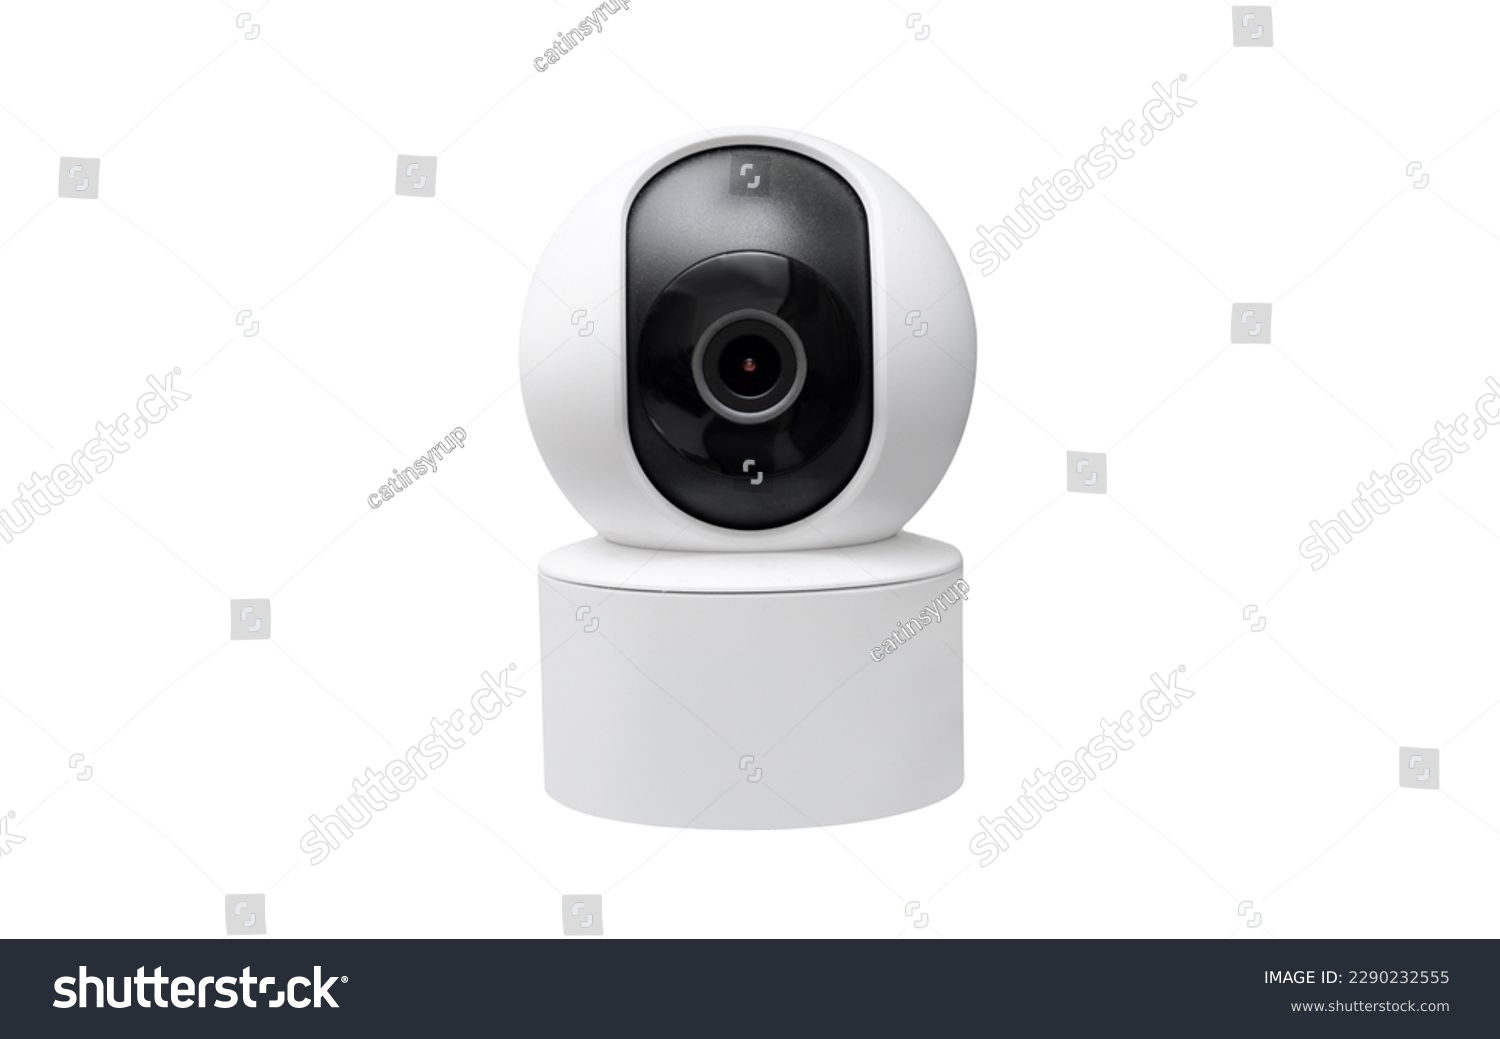 Closed up of Smart home wireless security camera isolated on white background, using for security monitoring or private cctv #2290232555